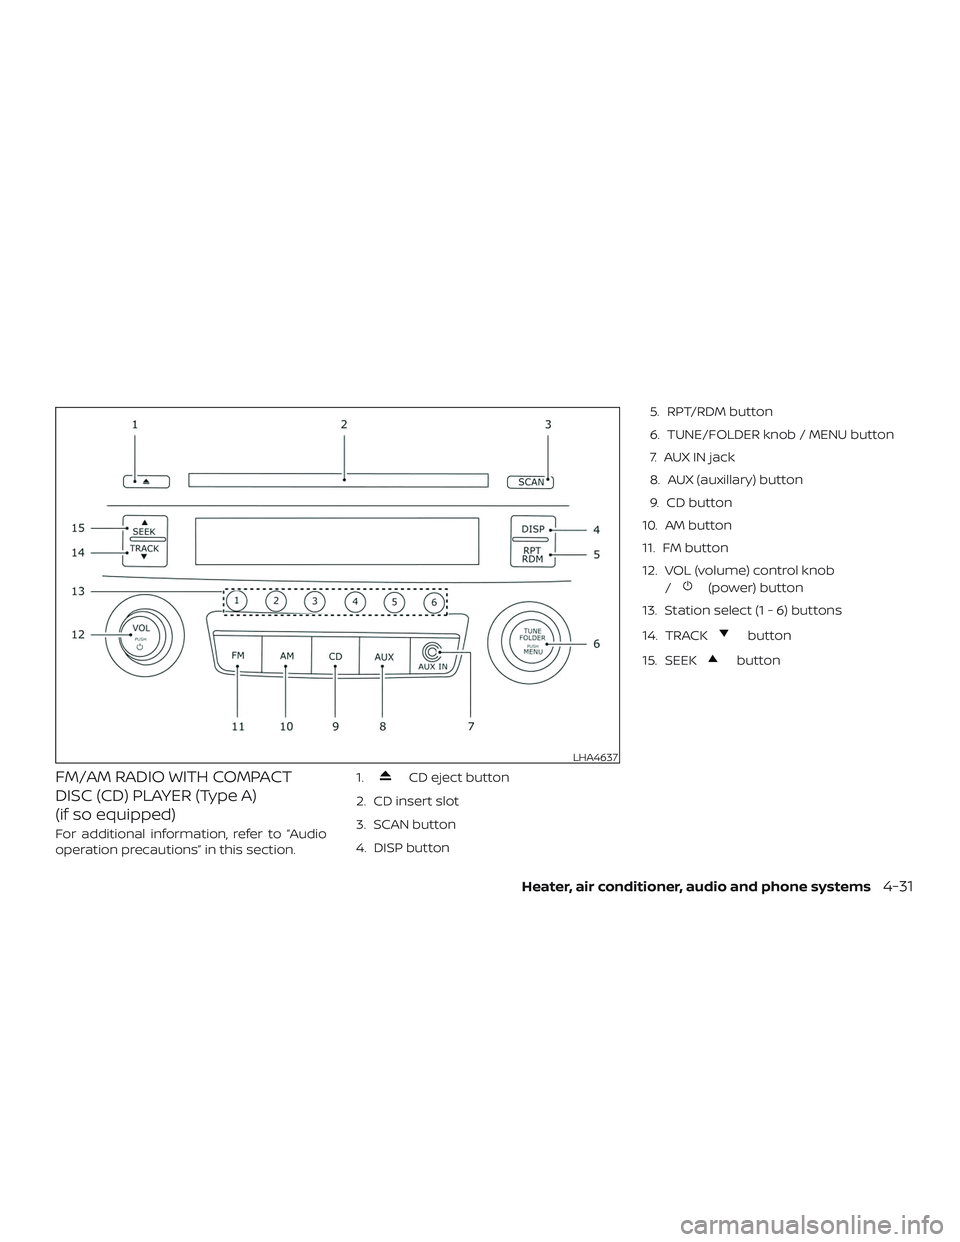 NISSAN MICRA 2018  Owner´s Manual FM/AM RADIO WITH COMPACT
DISC (CD) PLAYER (Type A)
(if so equipped)
For additional information, refer to “Audio
operation precautions” in this section.1.
CD eject button
2. CD insert slot
3. SCAN 